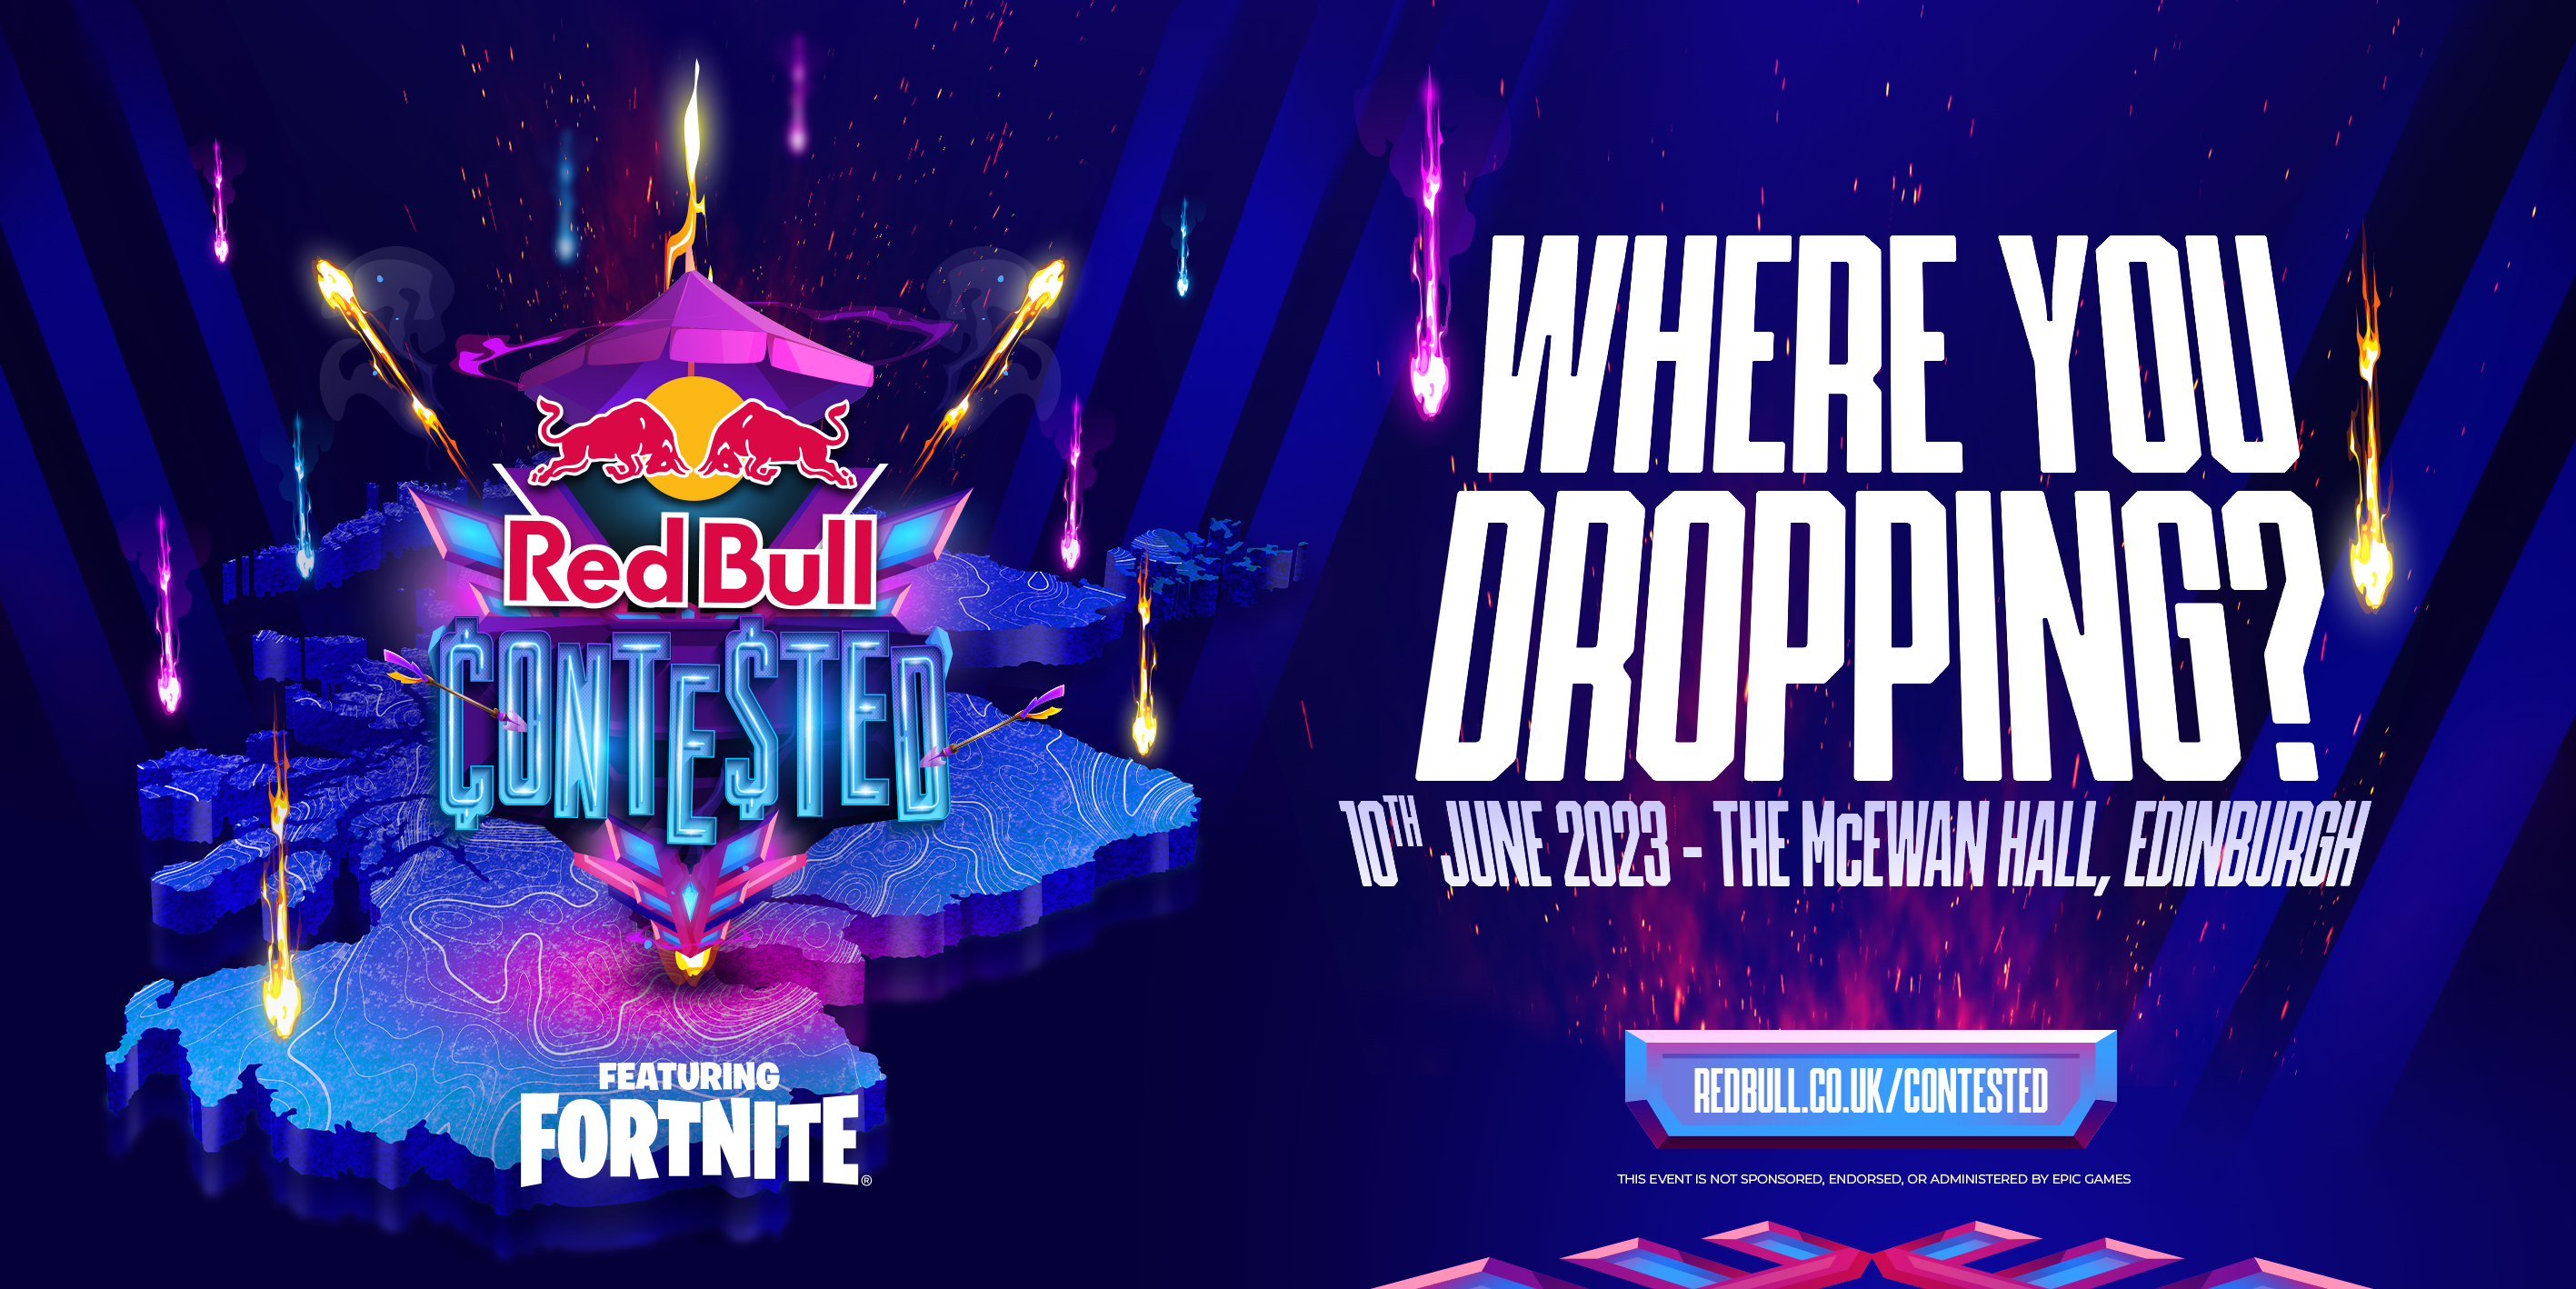 Red Bull is vying to become the UK’s first major Fortnite event